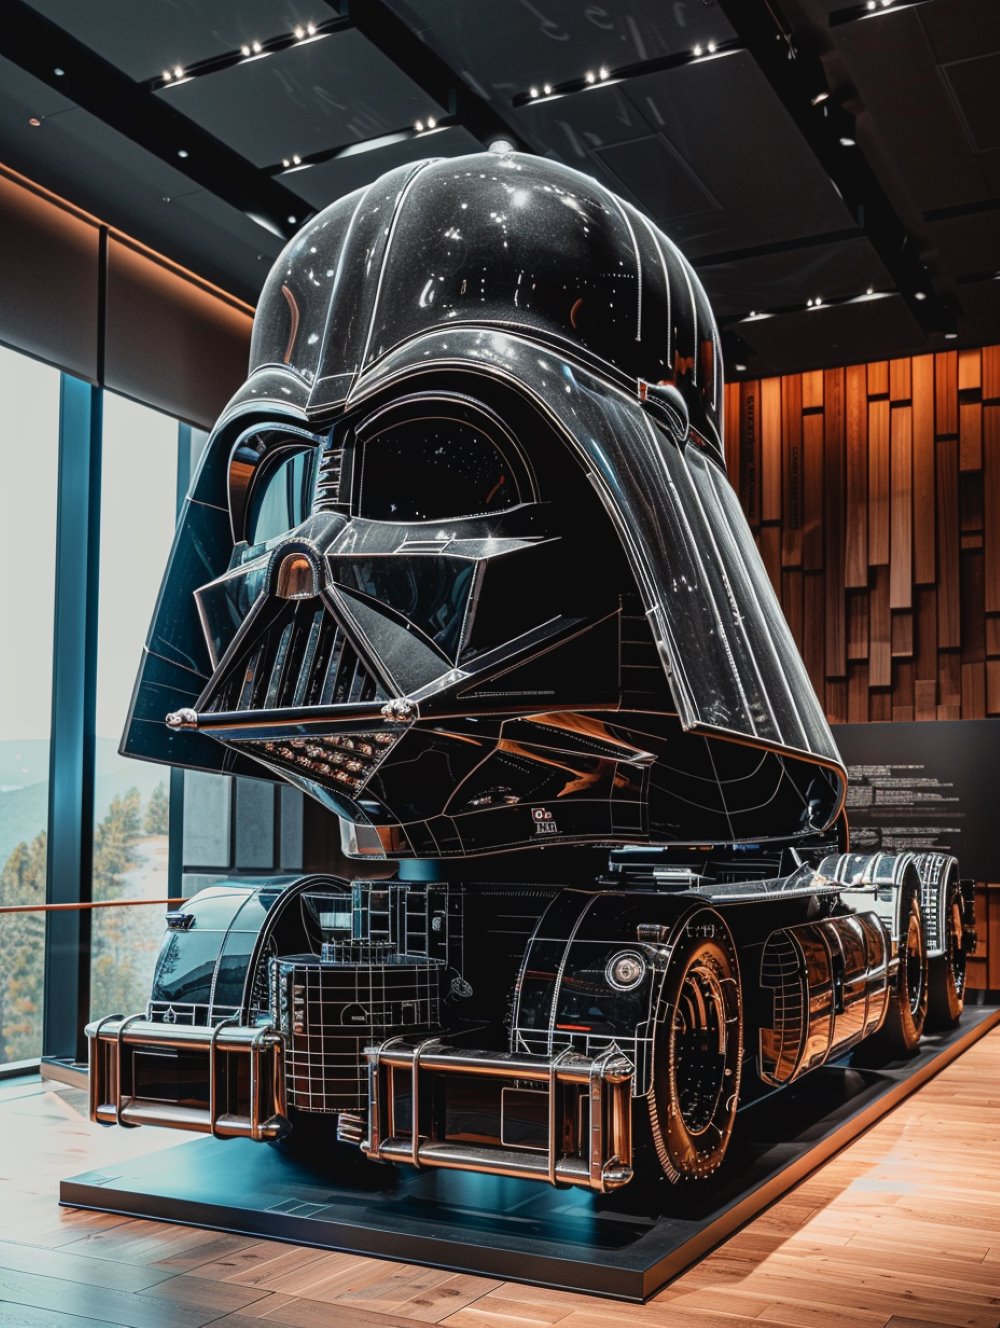 the goods carrier truck with a cabin in shape of the Darth Vader helmet